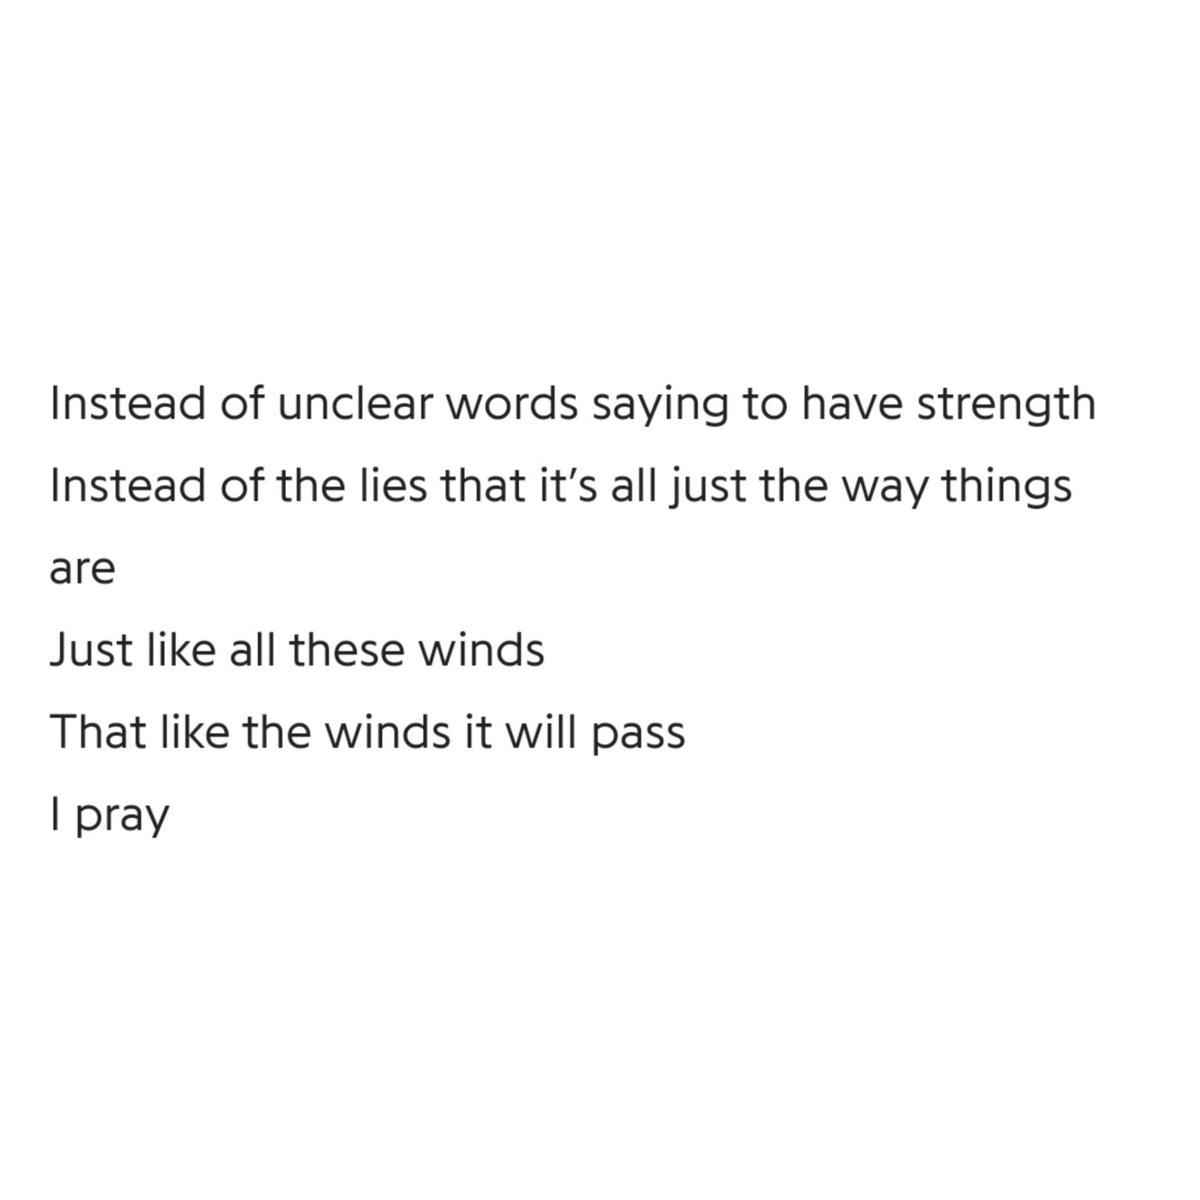 Sure to come to an end one day. Joon raps, "just like all these winds, that like the winds it will pass, I pray", he does smth really interesting here: the first "wind" refers to the wind of falseness n lies, the second "wind" refers to actual wind that blows due to pressure+